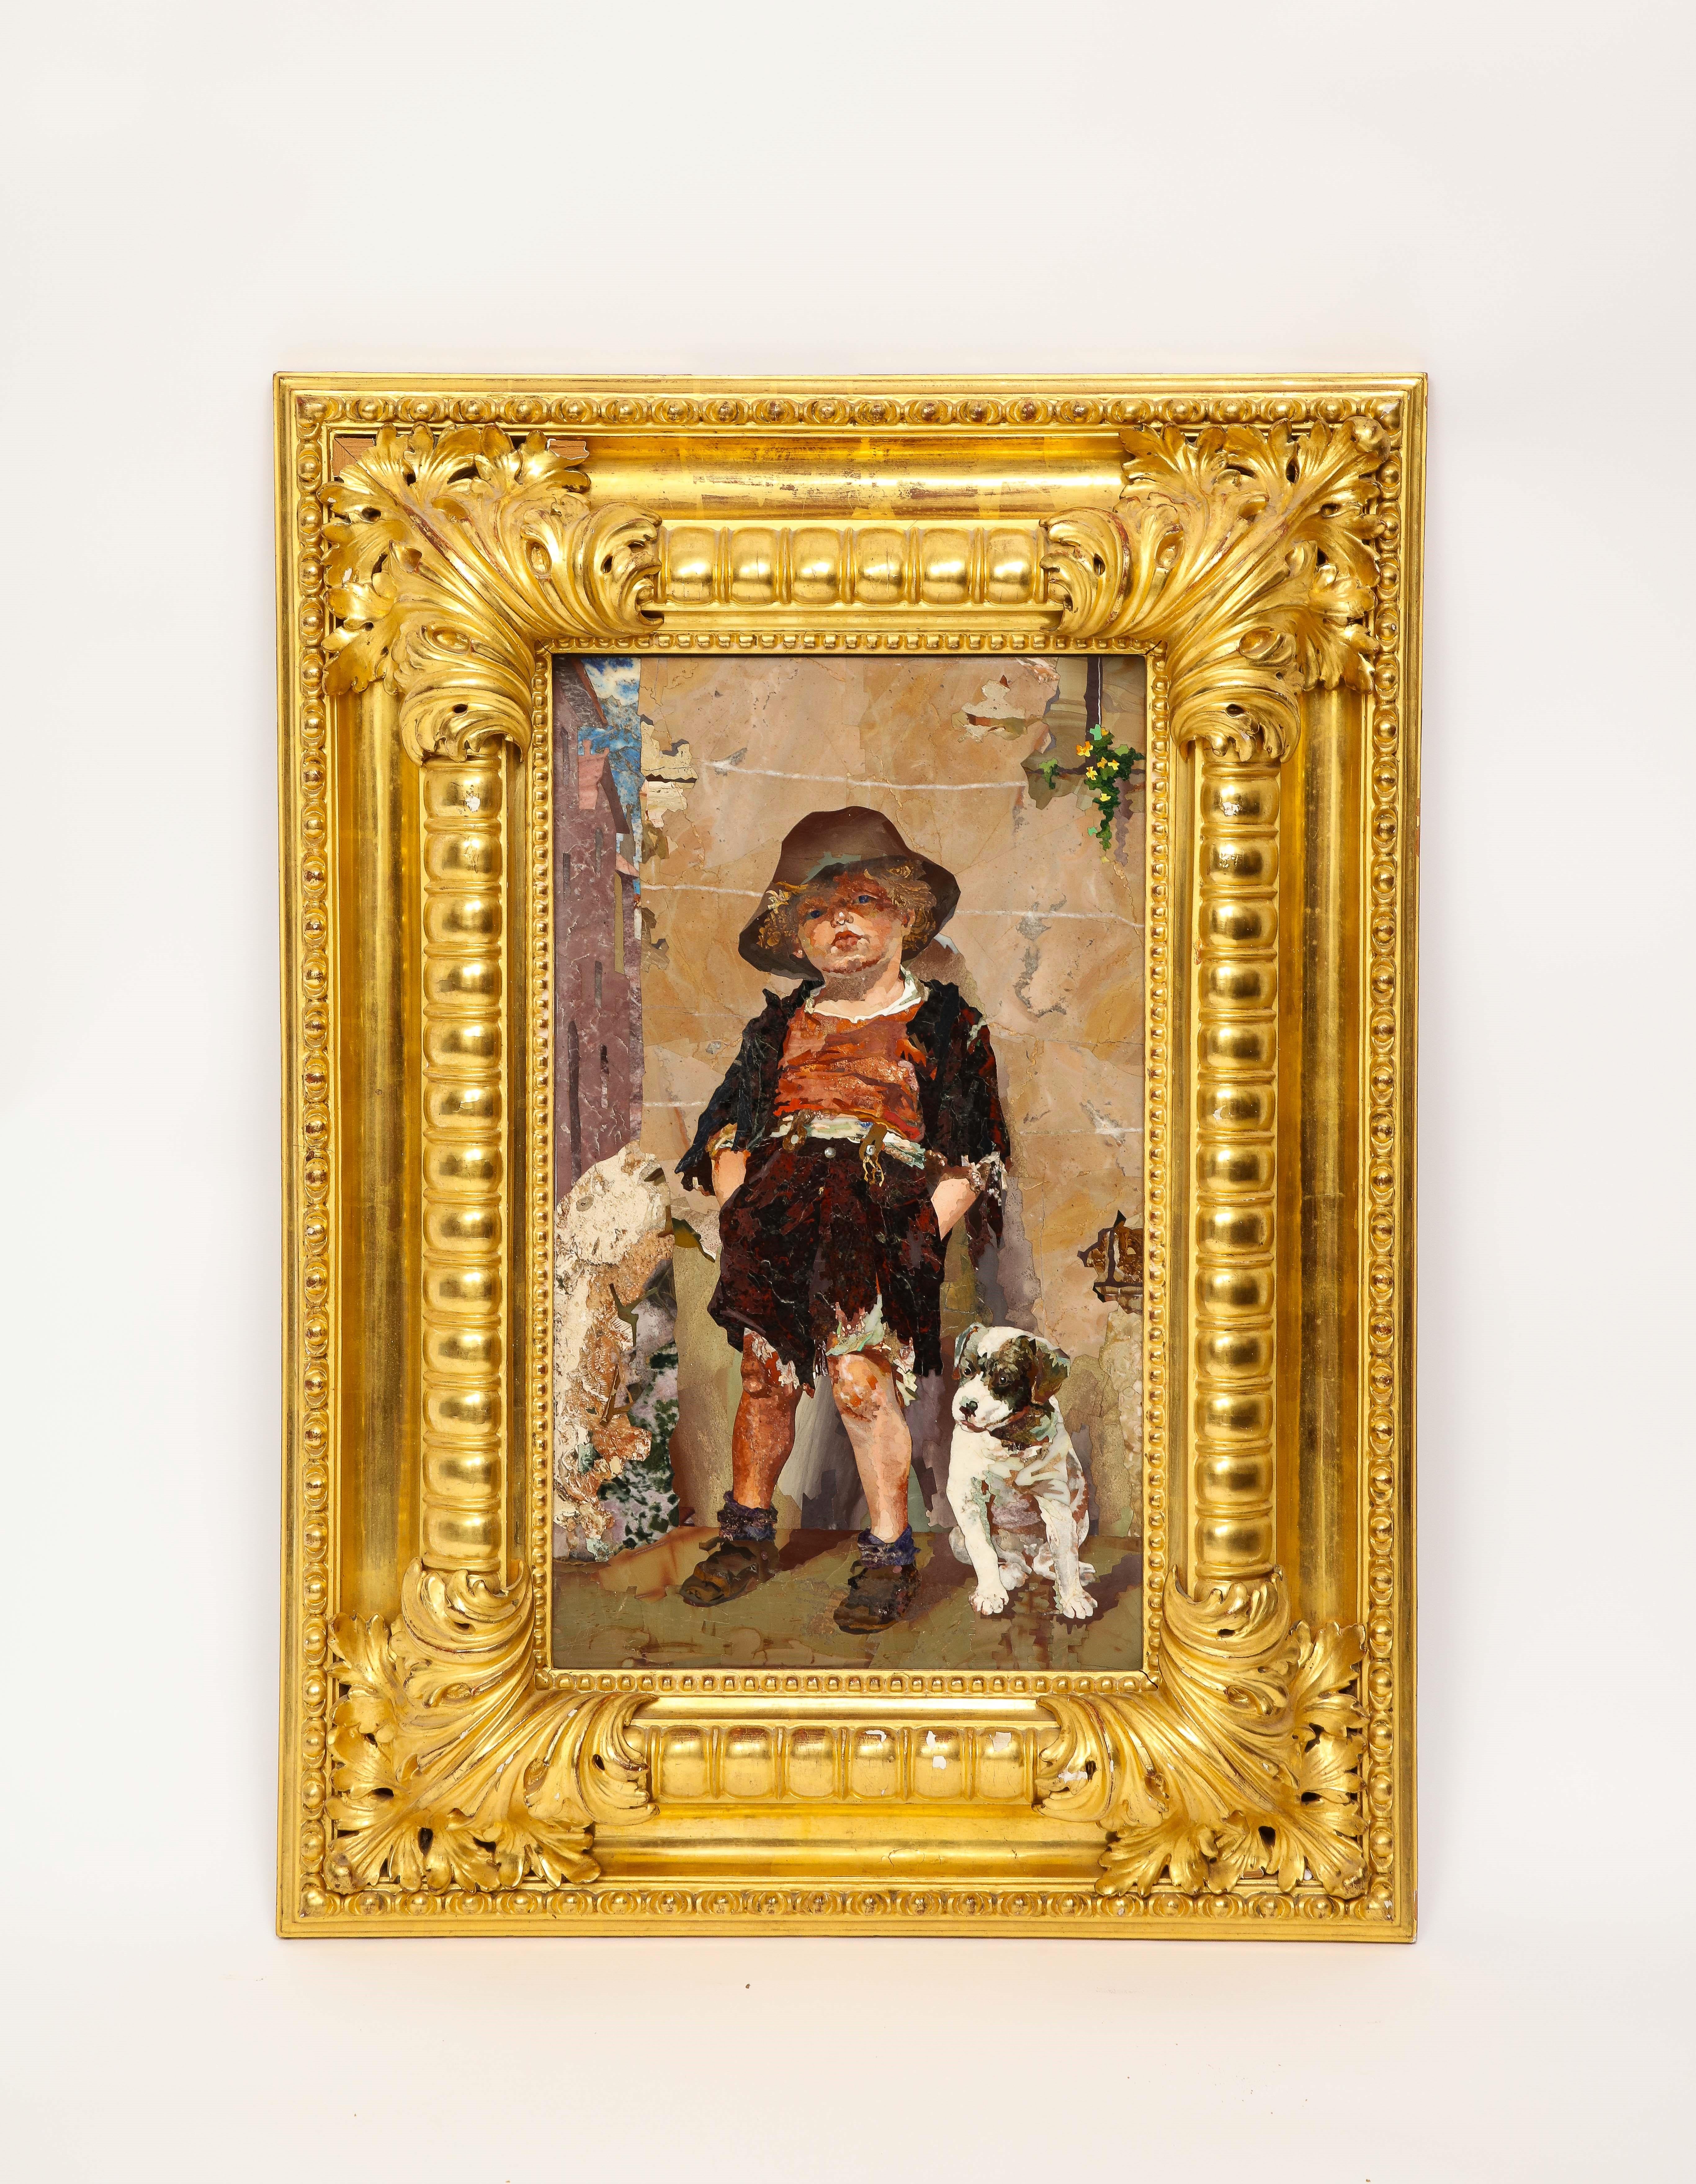 Other A Rare Italian Giltwood Framed Pietre Dure By Mario Montelatici '2 Little Tykes'